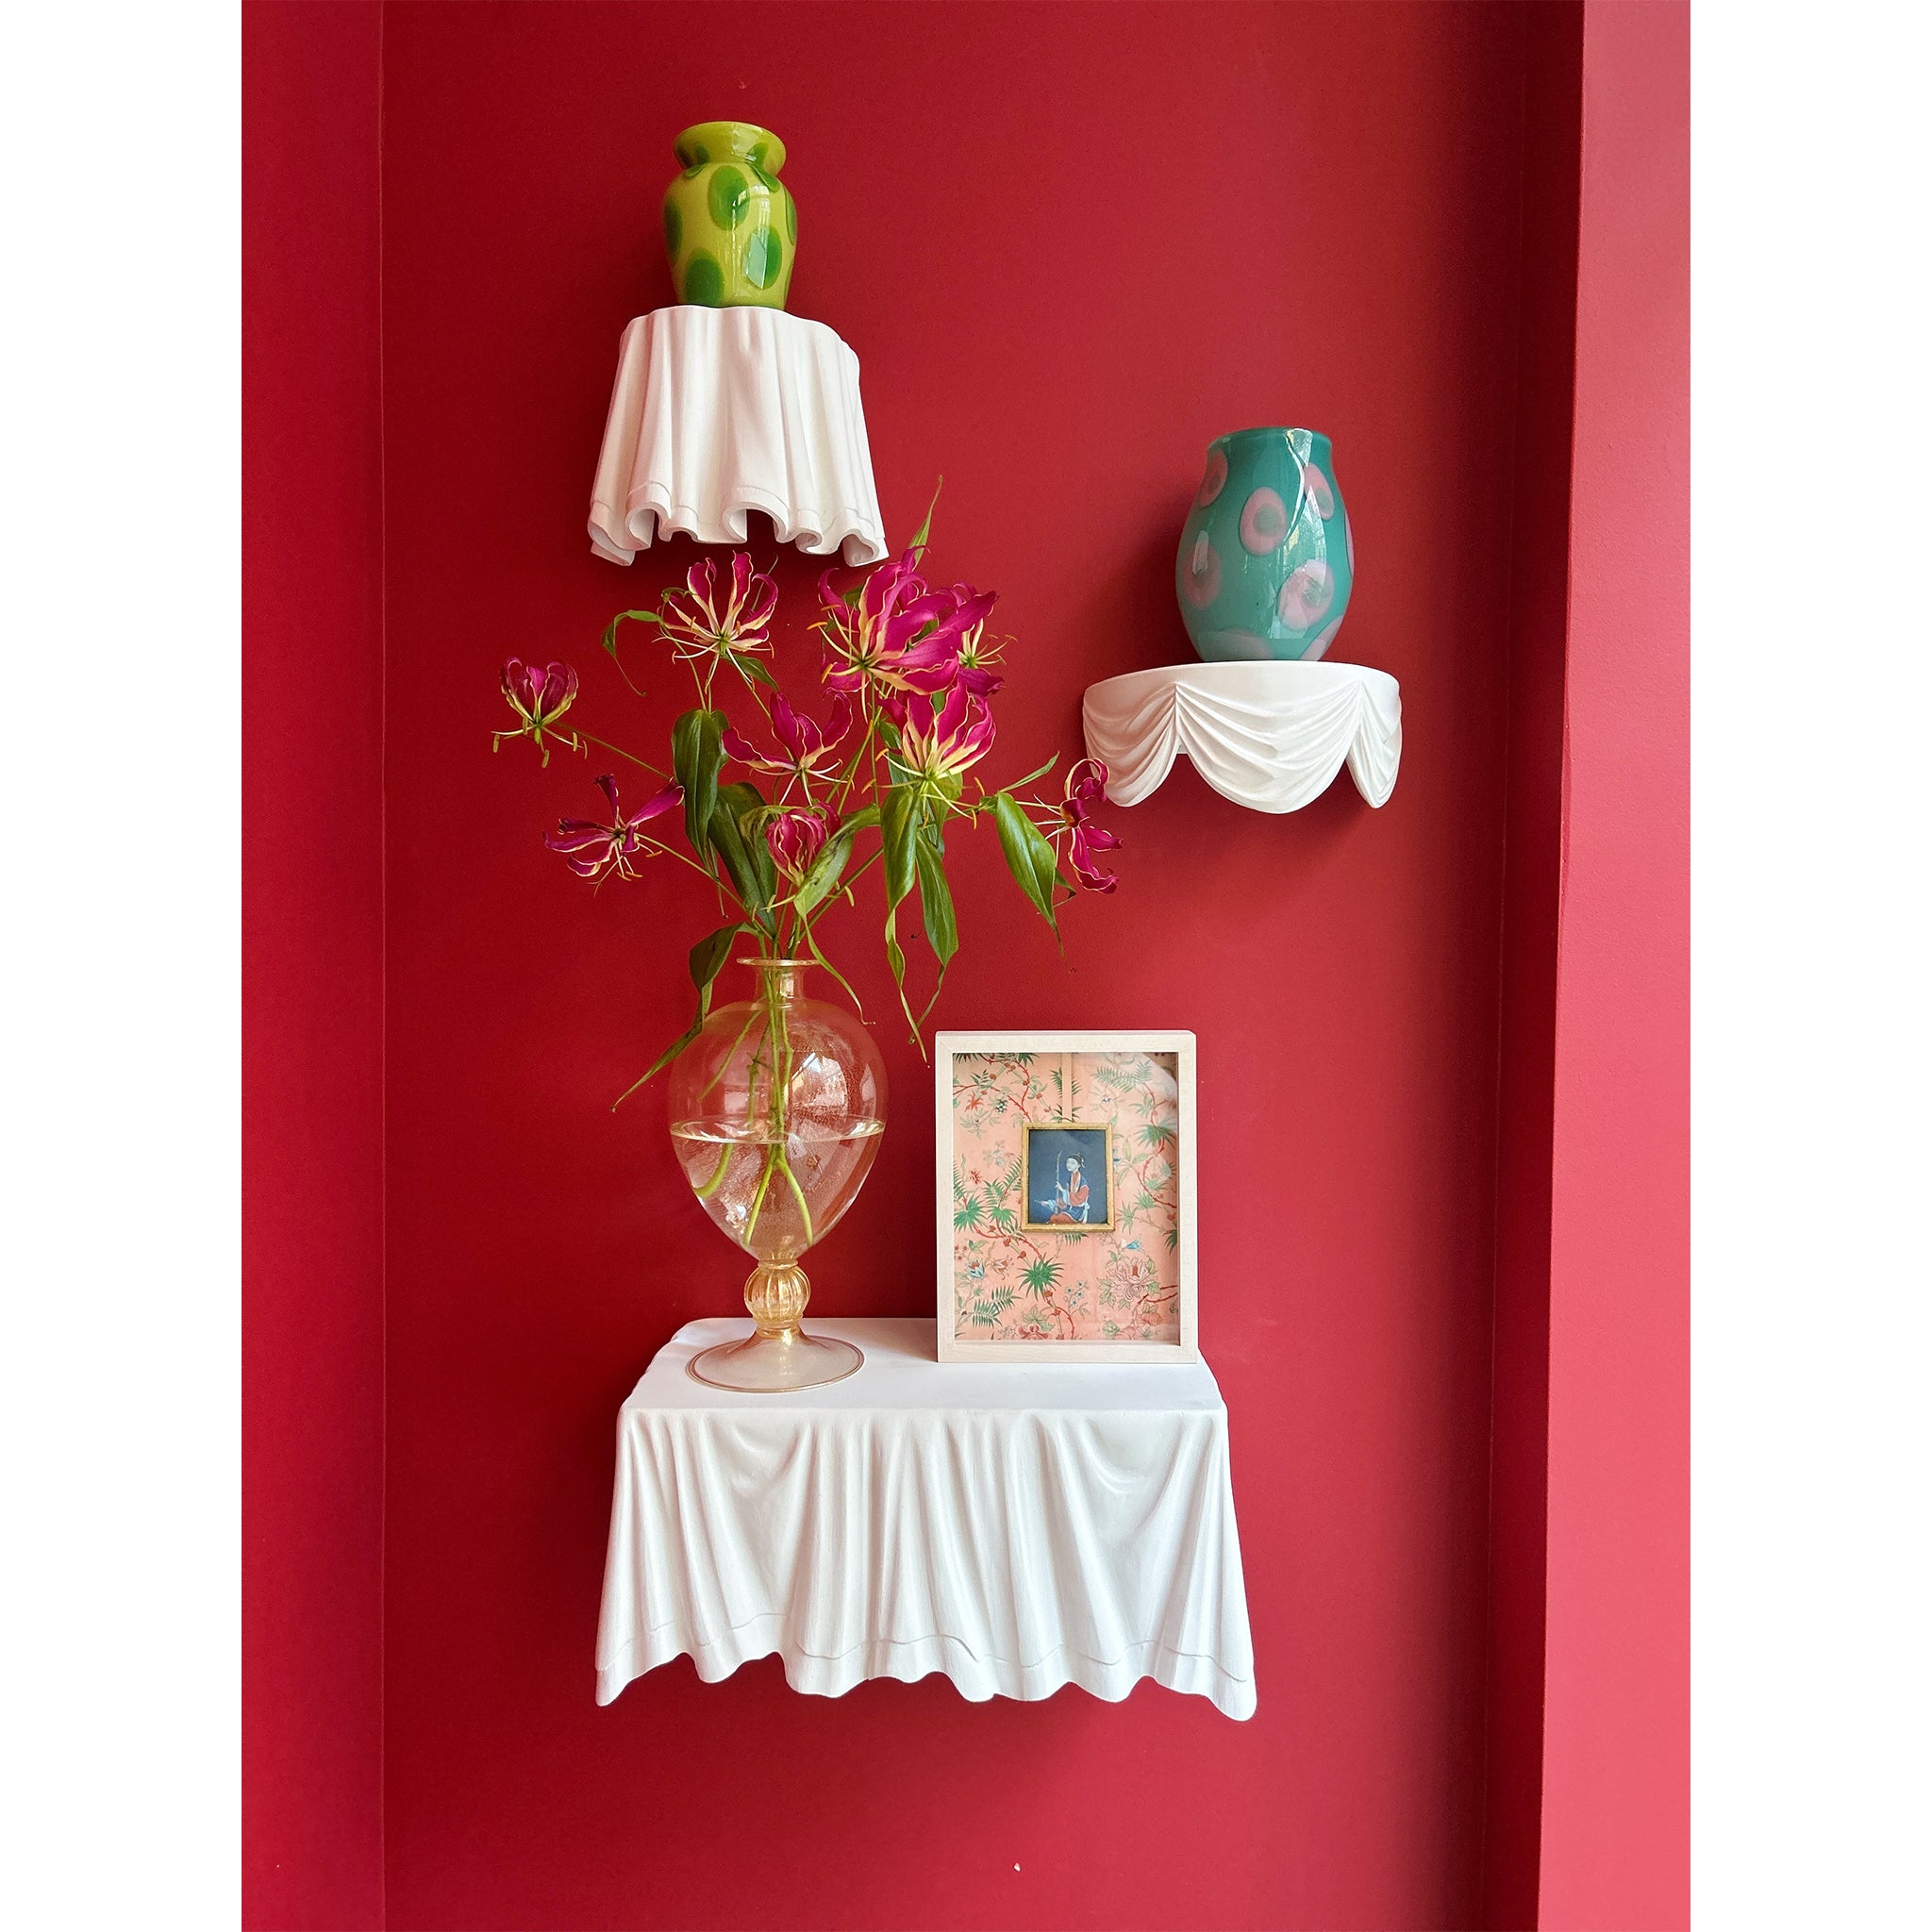 The Draped Sconce